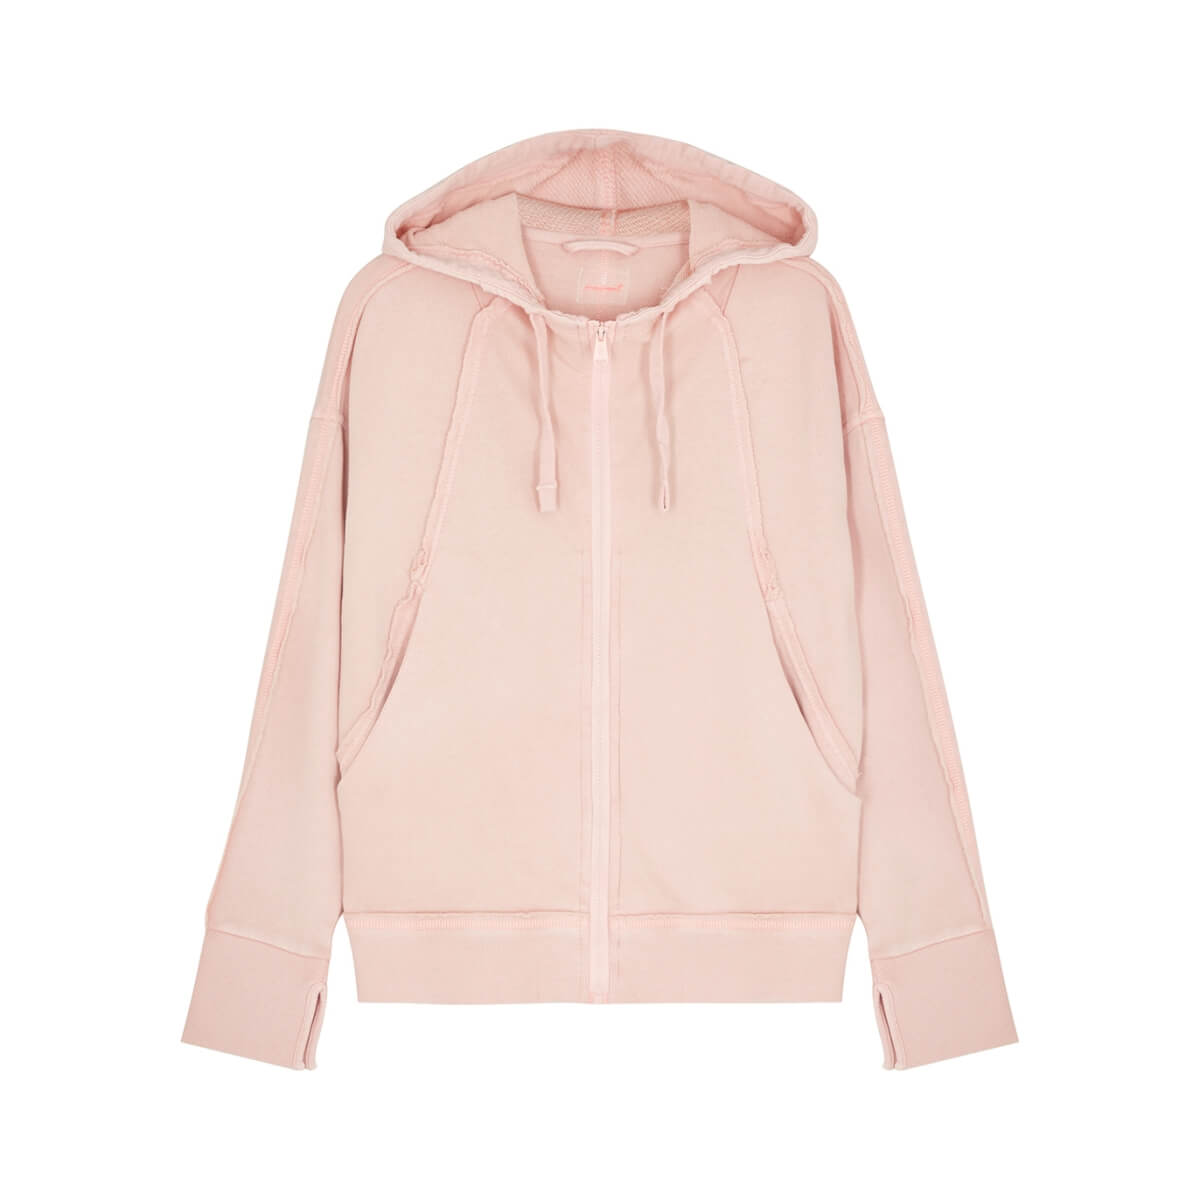 Free People Movement Only One Hooded Cotton Sweatshirt - Rose - L